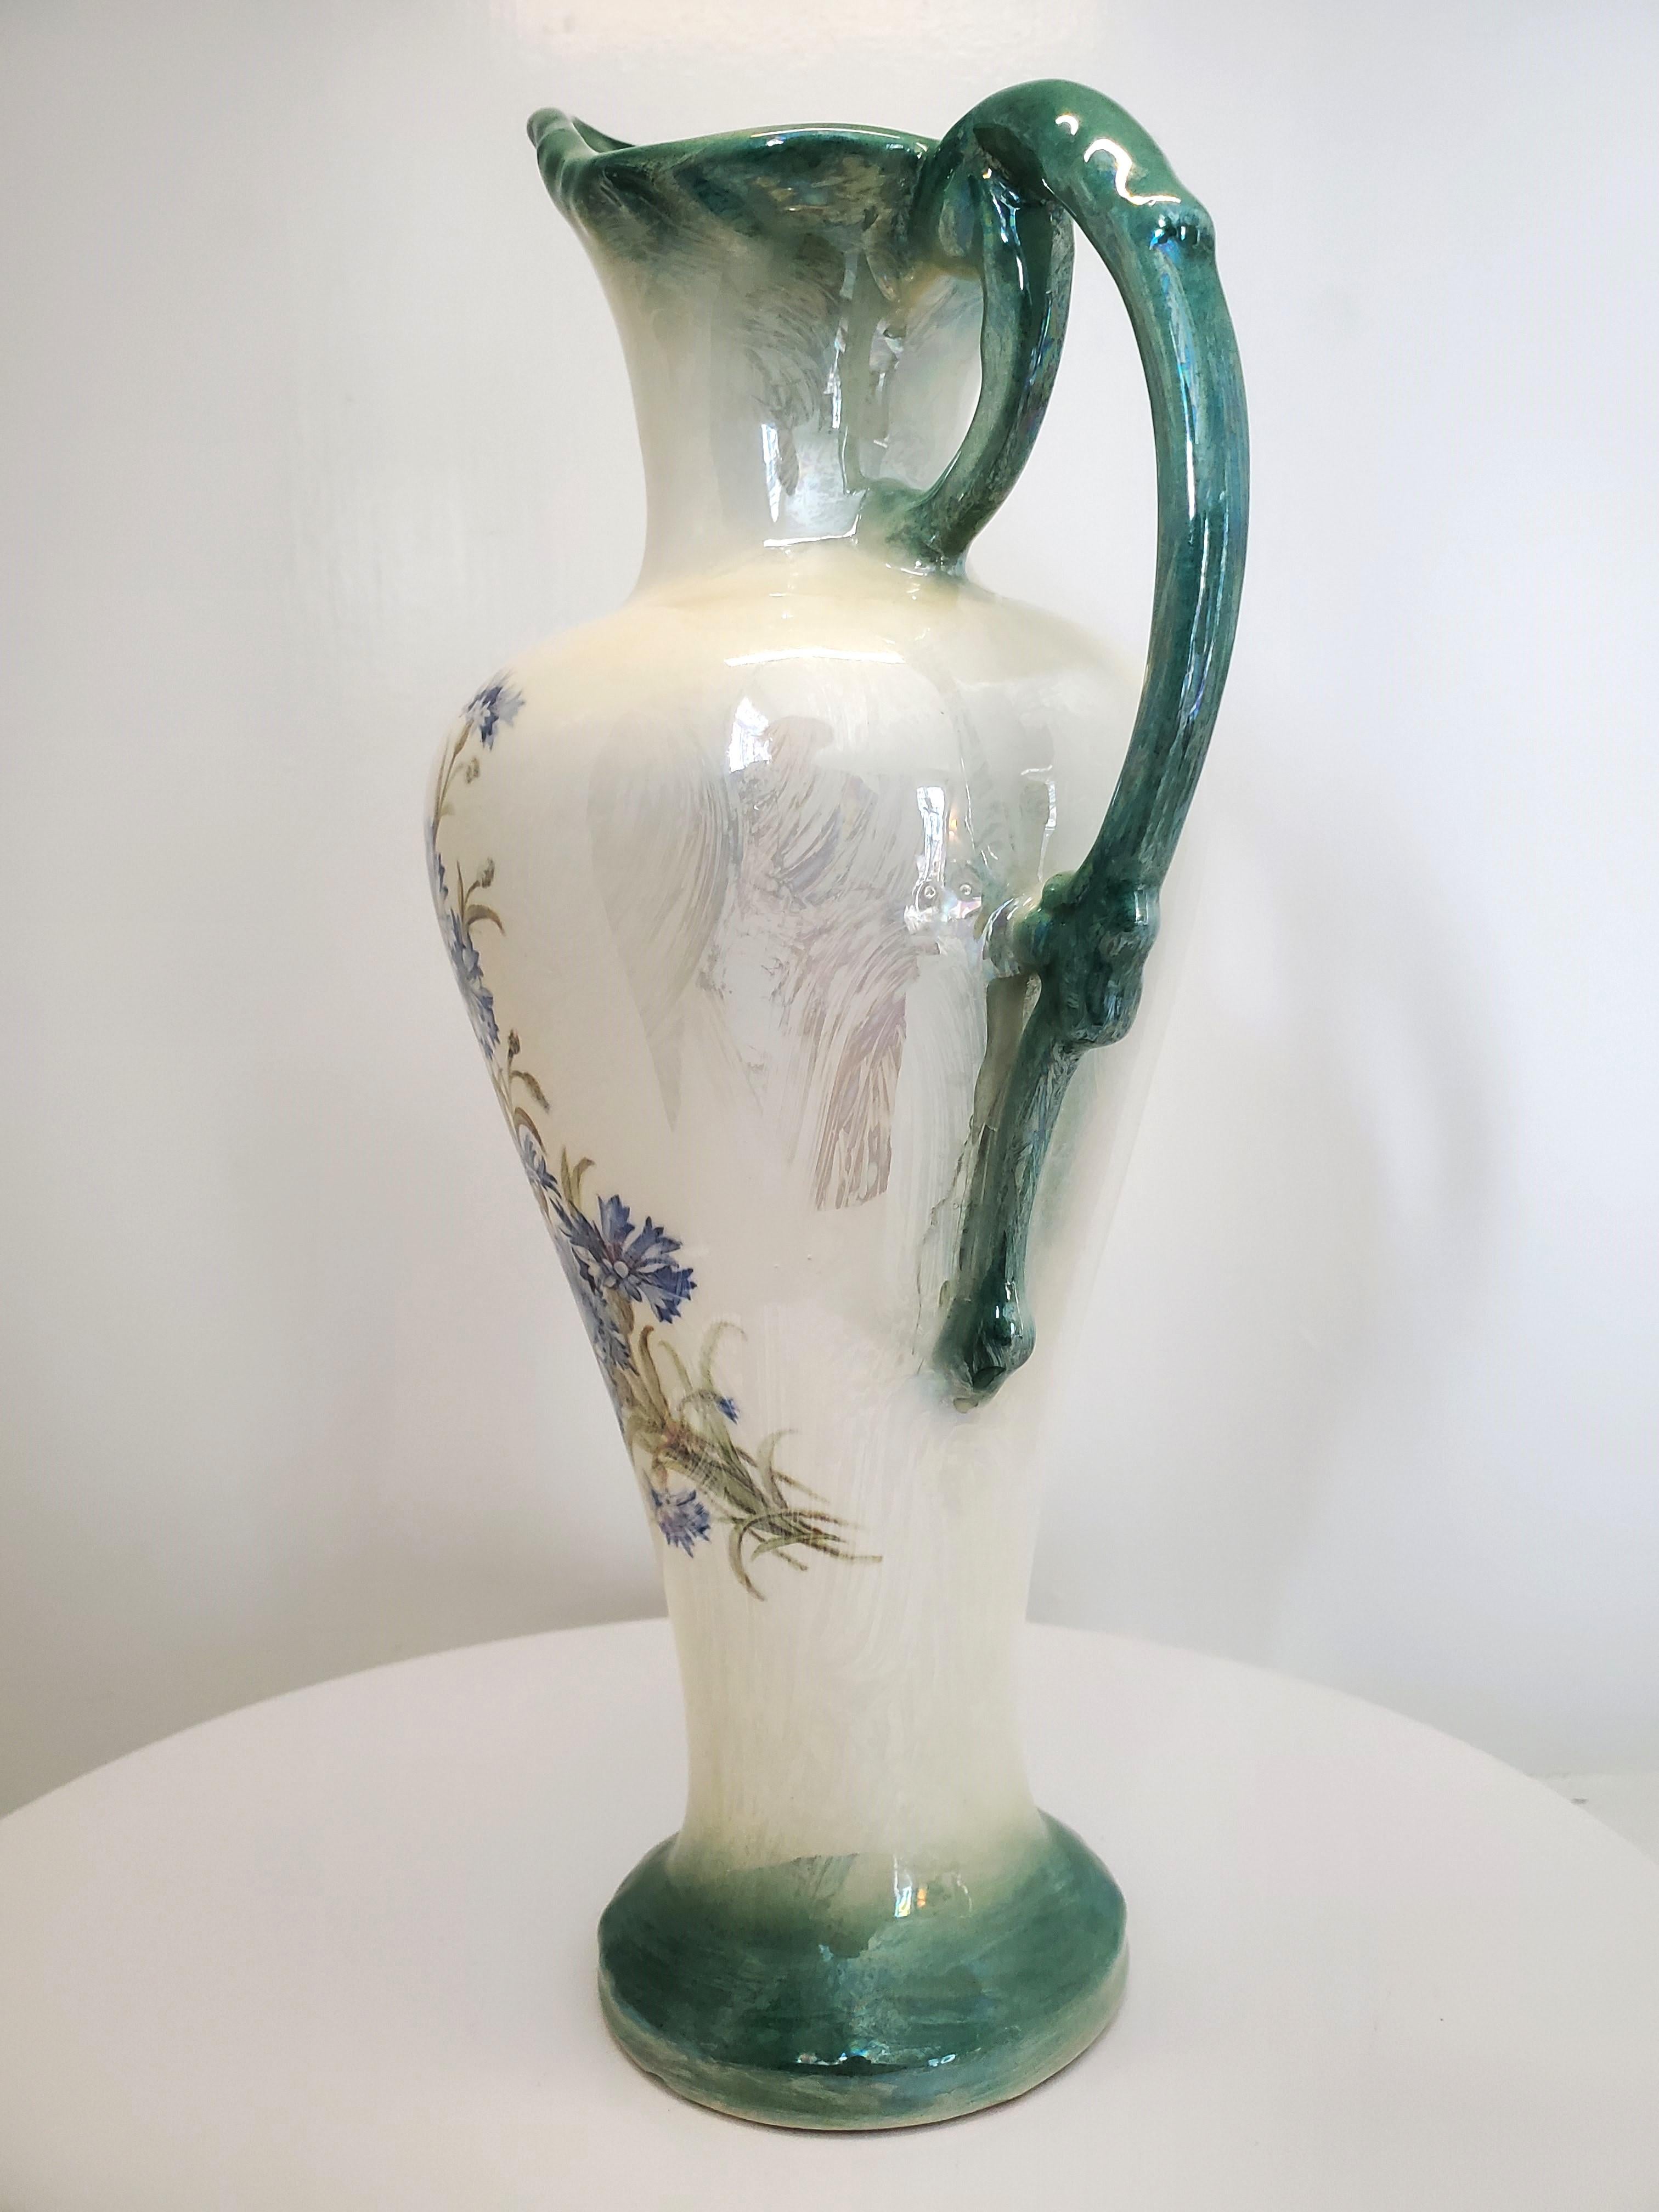 This rare Victorian opalescent lusterware ewer boasts a pearly iridescent base colour and blue-green trim on the mouth, handle, and base. It is decorated with a bouquet of light blue flowers and light olive-green stems, leaves, and buds. The